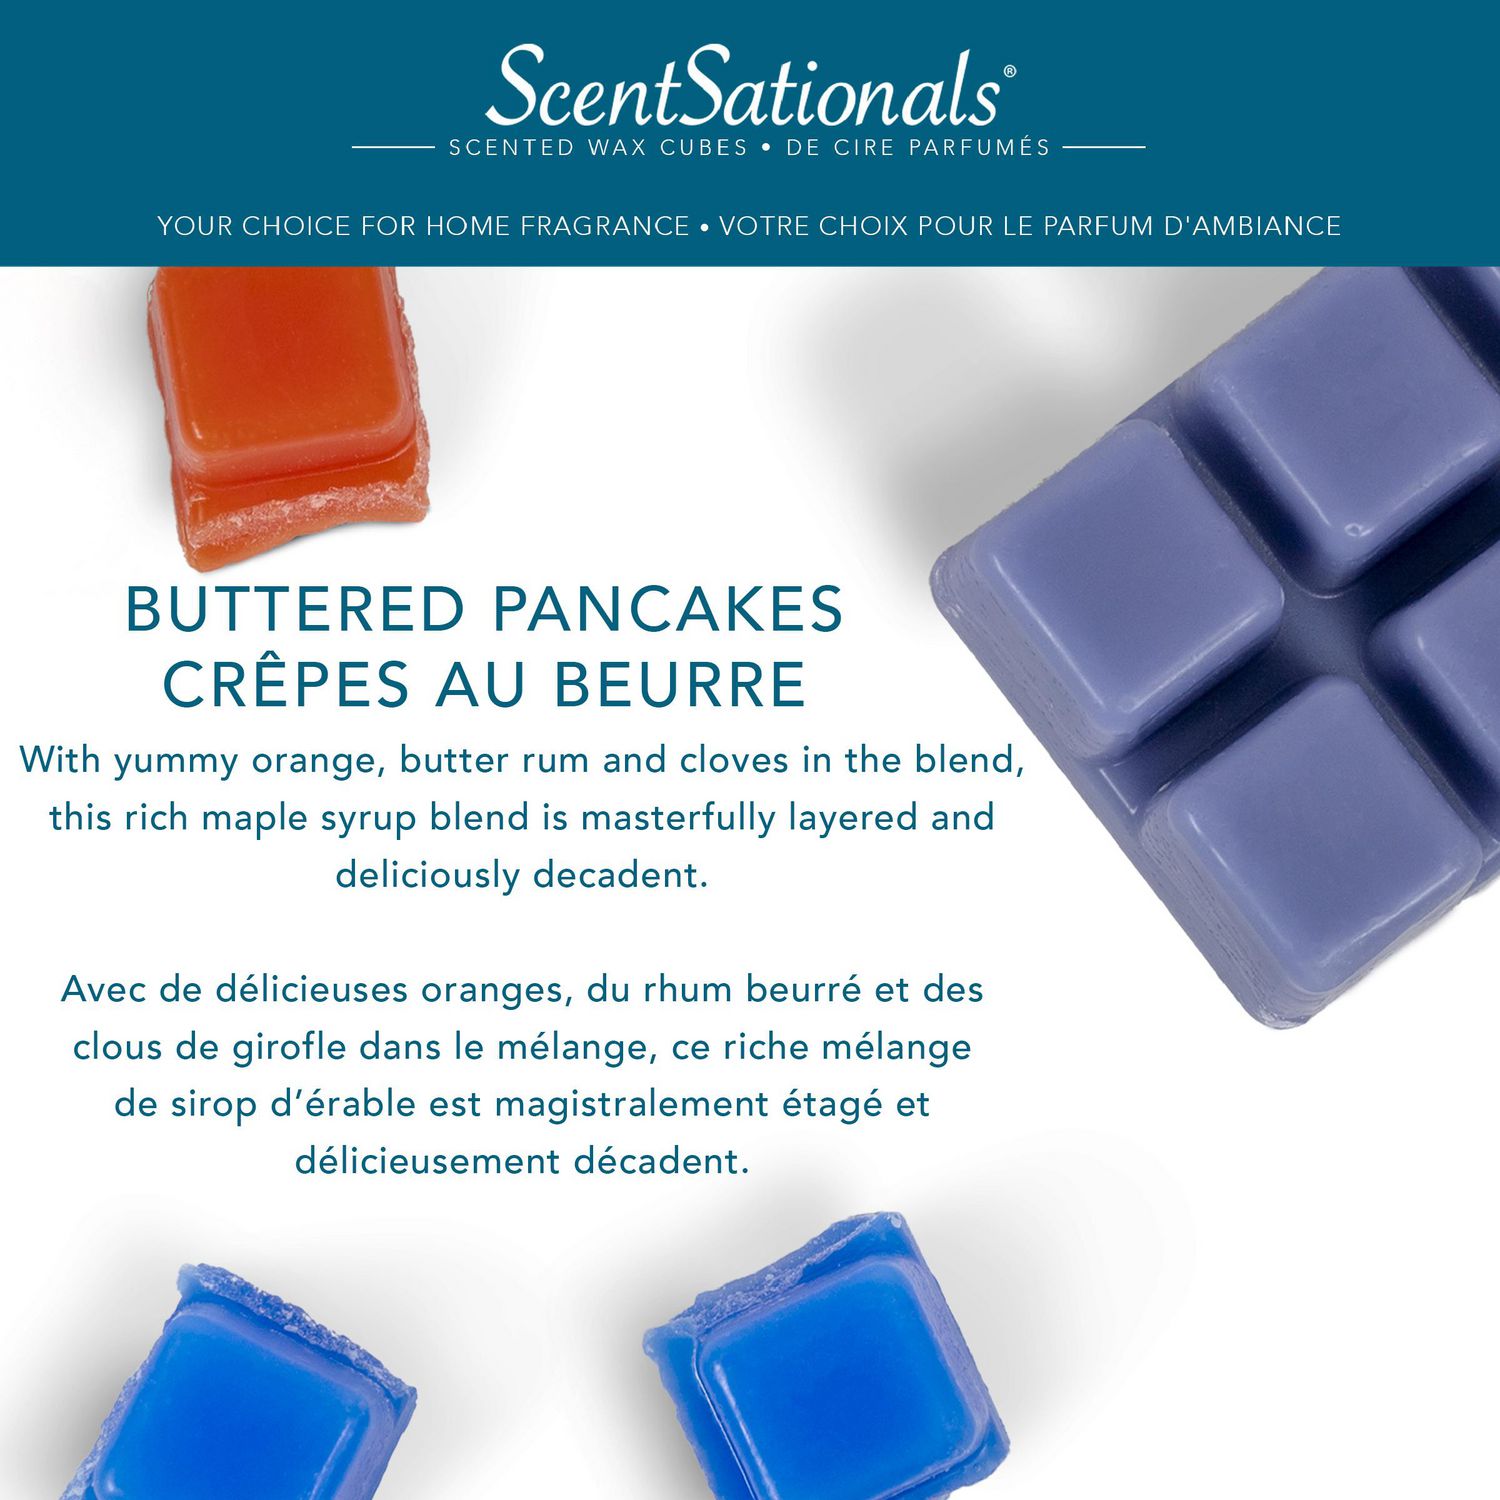 ScentSationals Scented Wax Cubes - Buttered Pancakes, 2.5 oz (70.9 g) 